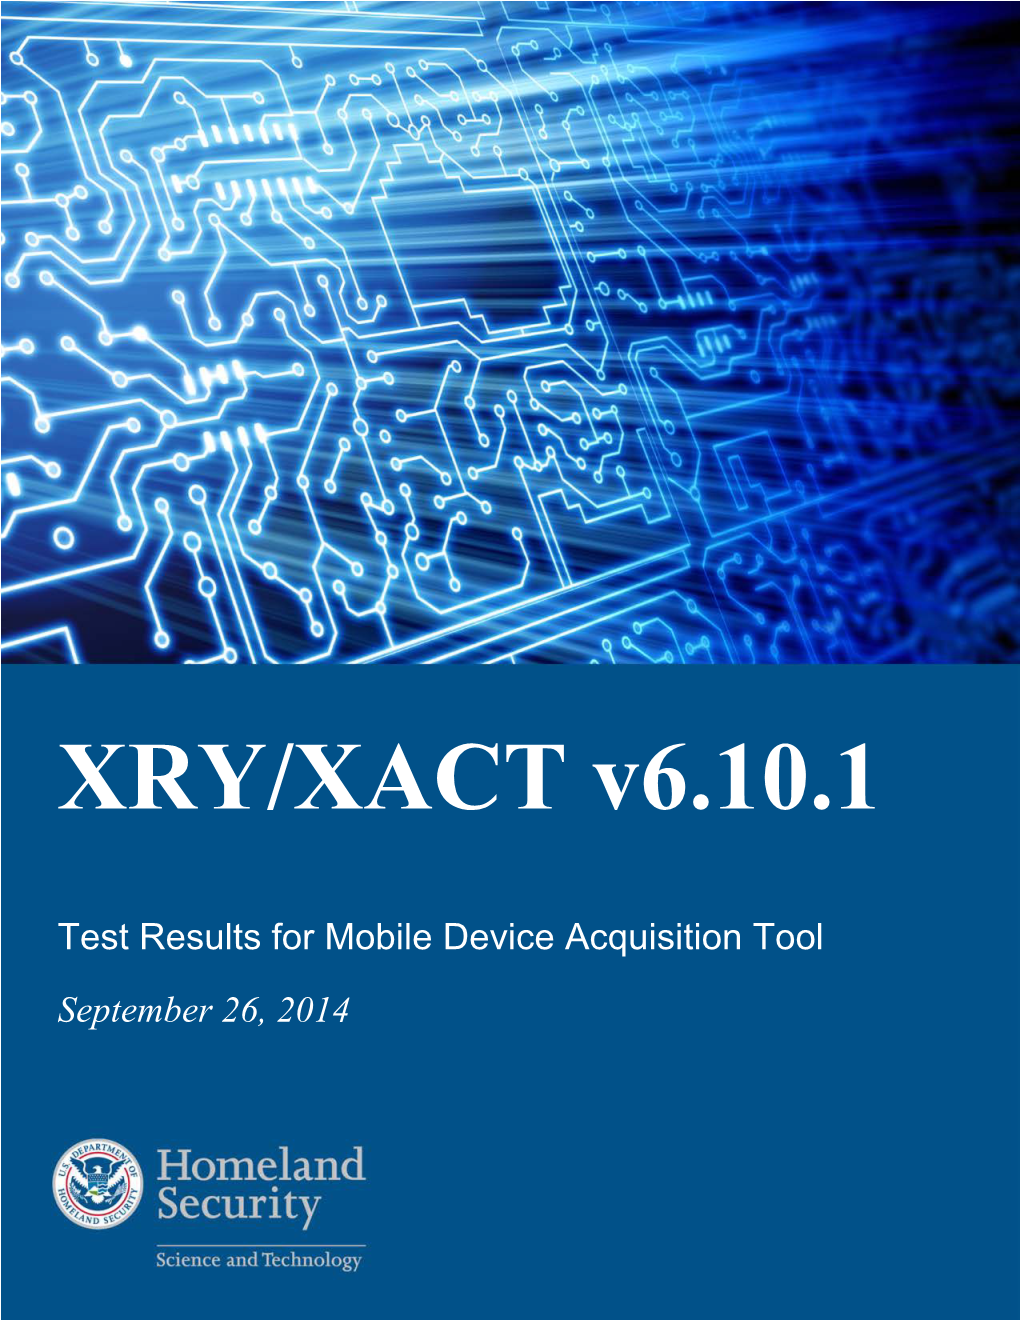 Test Results for Mobile Device Acquisition Tool: XRY/ XACT V6.10.1